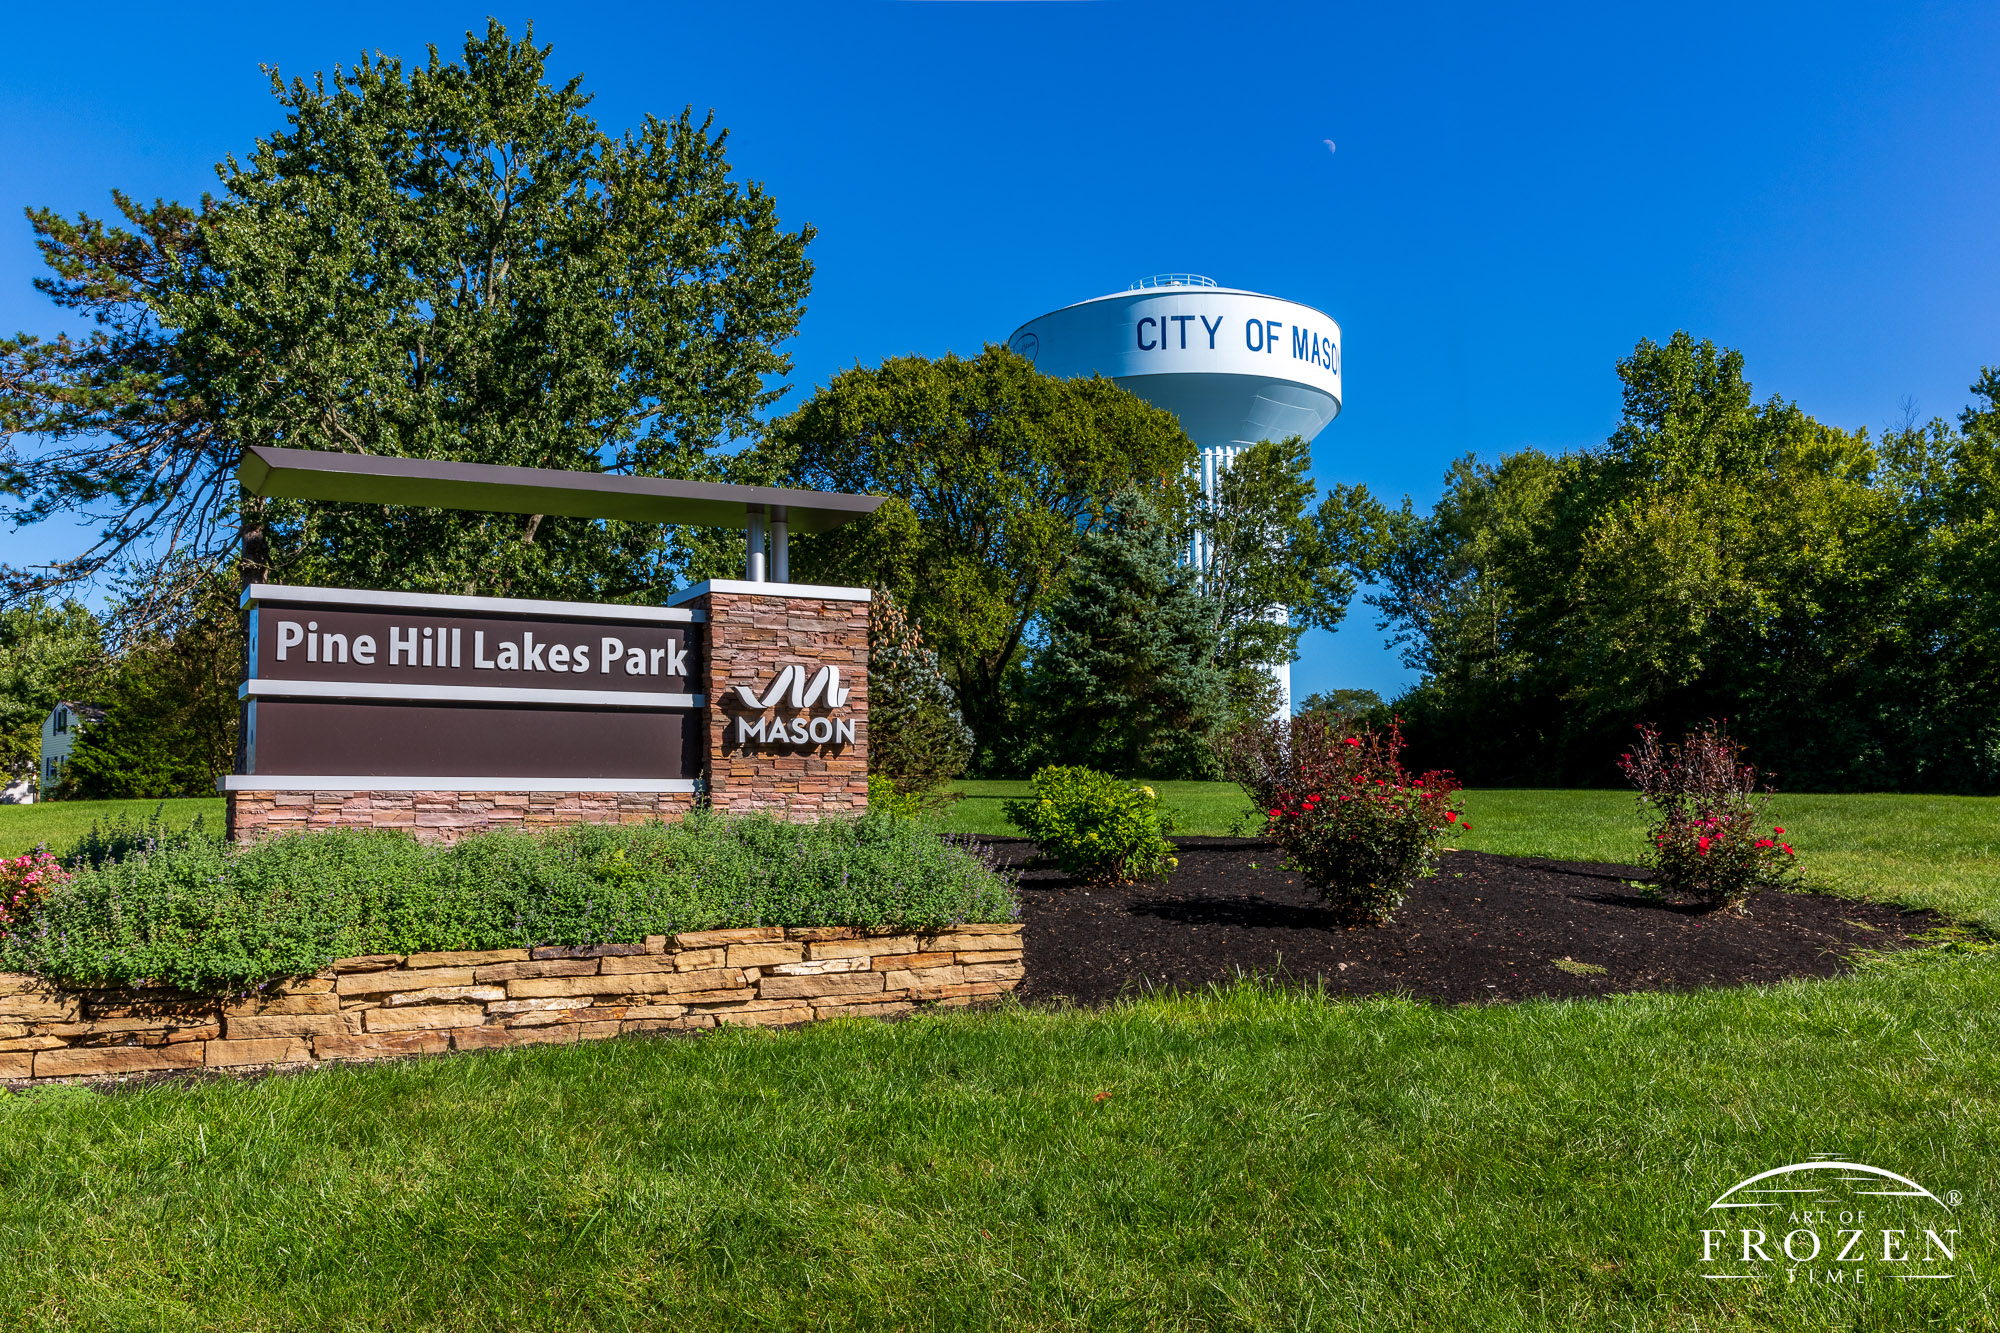 The park entrance sign for Pine Hills Lakes Park on a pretty day with blue skies